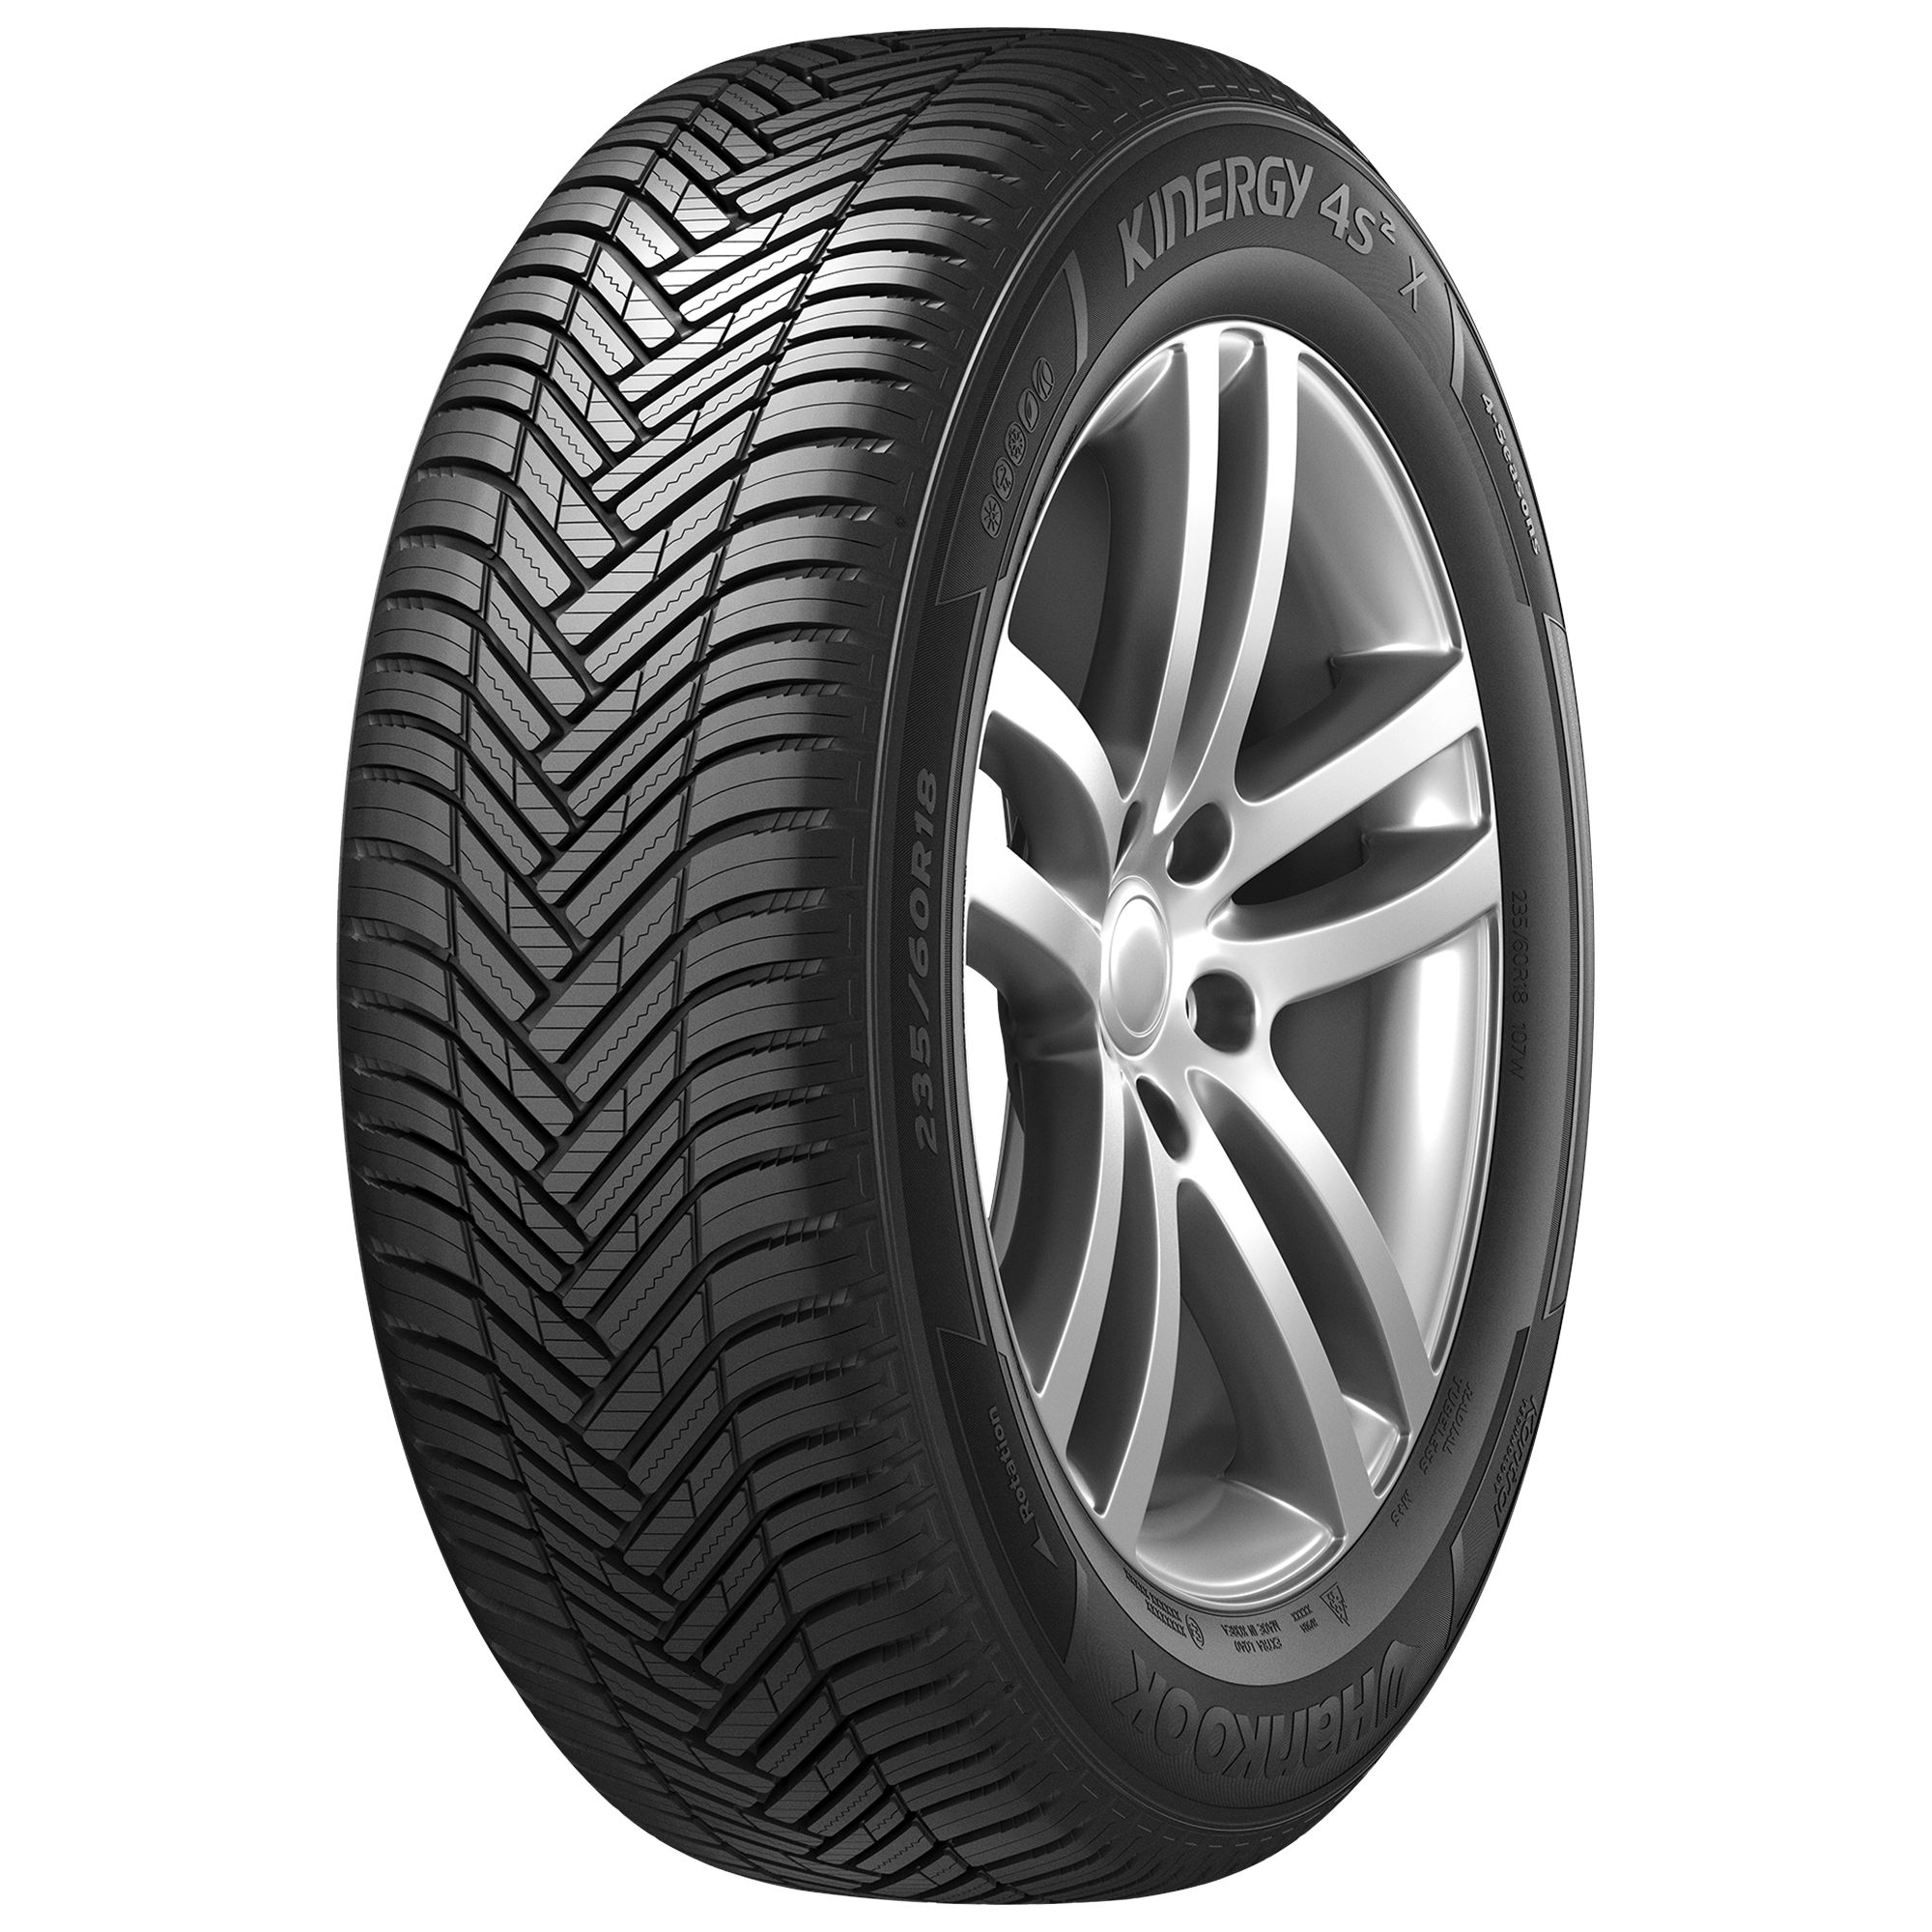 HANKOOK KINERGY 4S 2 X (H750A) 215/55R18 99V BSW